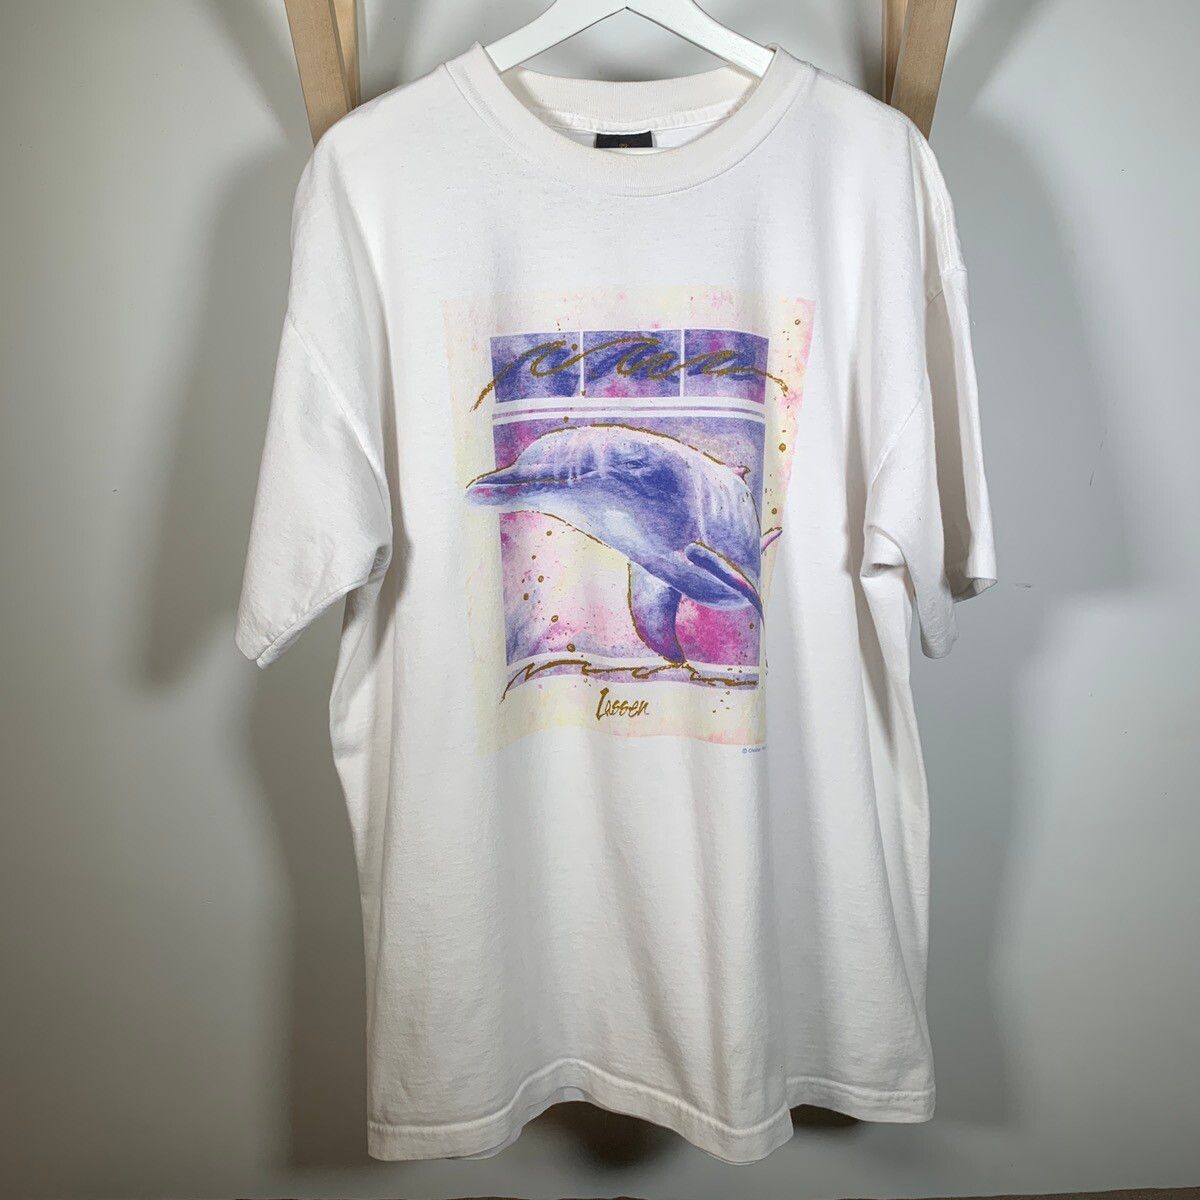 Vintage Vintage 90s Dolphin Animal Whales Ocean T Shirt Made In USA Size US XL / EU 56 / 4 - 1 Preview